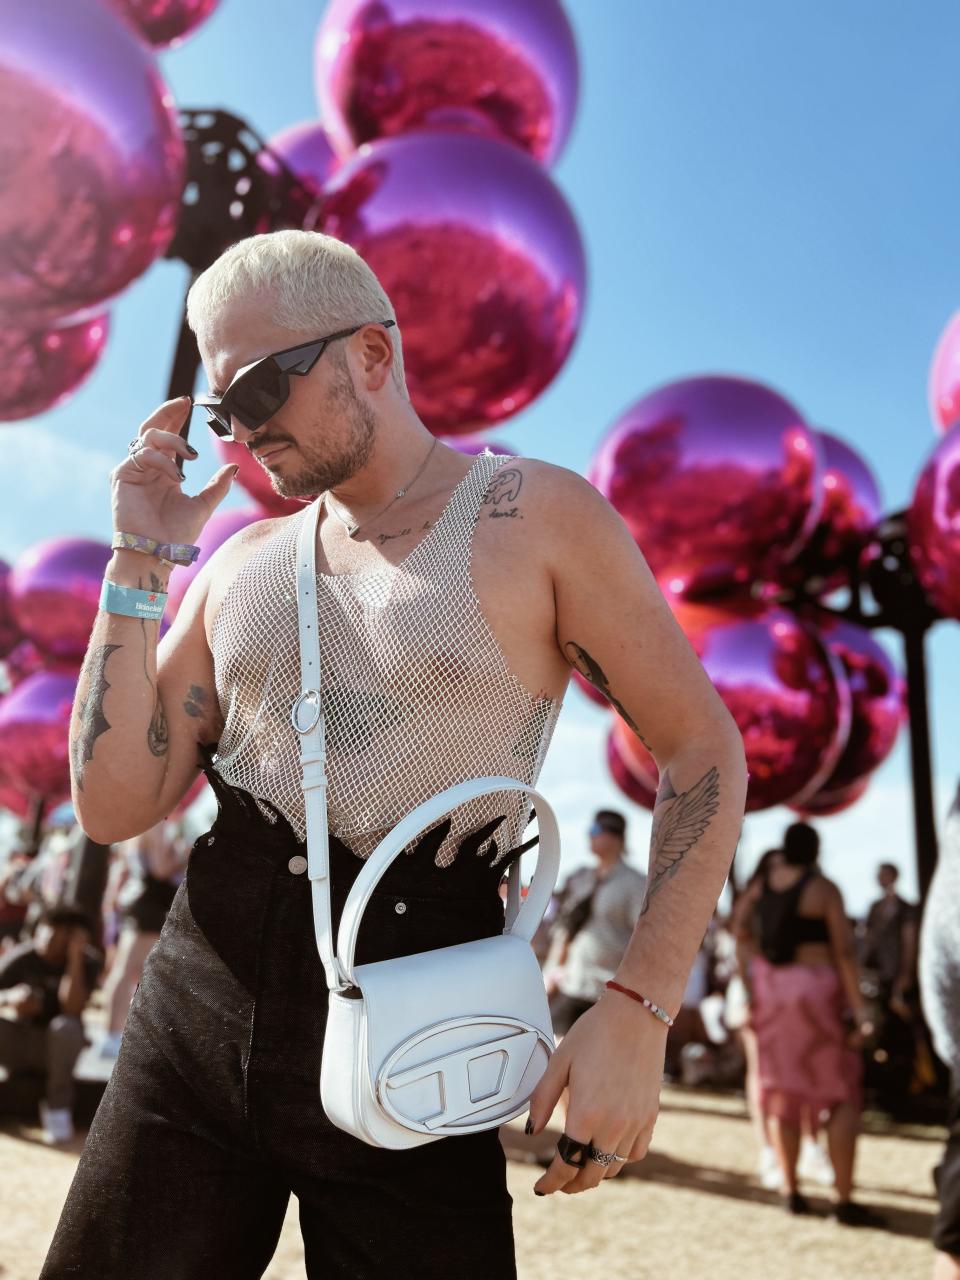 Christian Grotewold at coachella in sparkly top and white purse